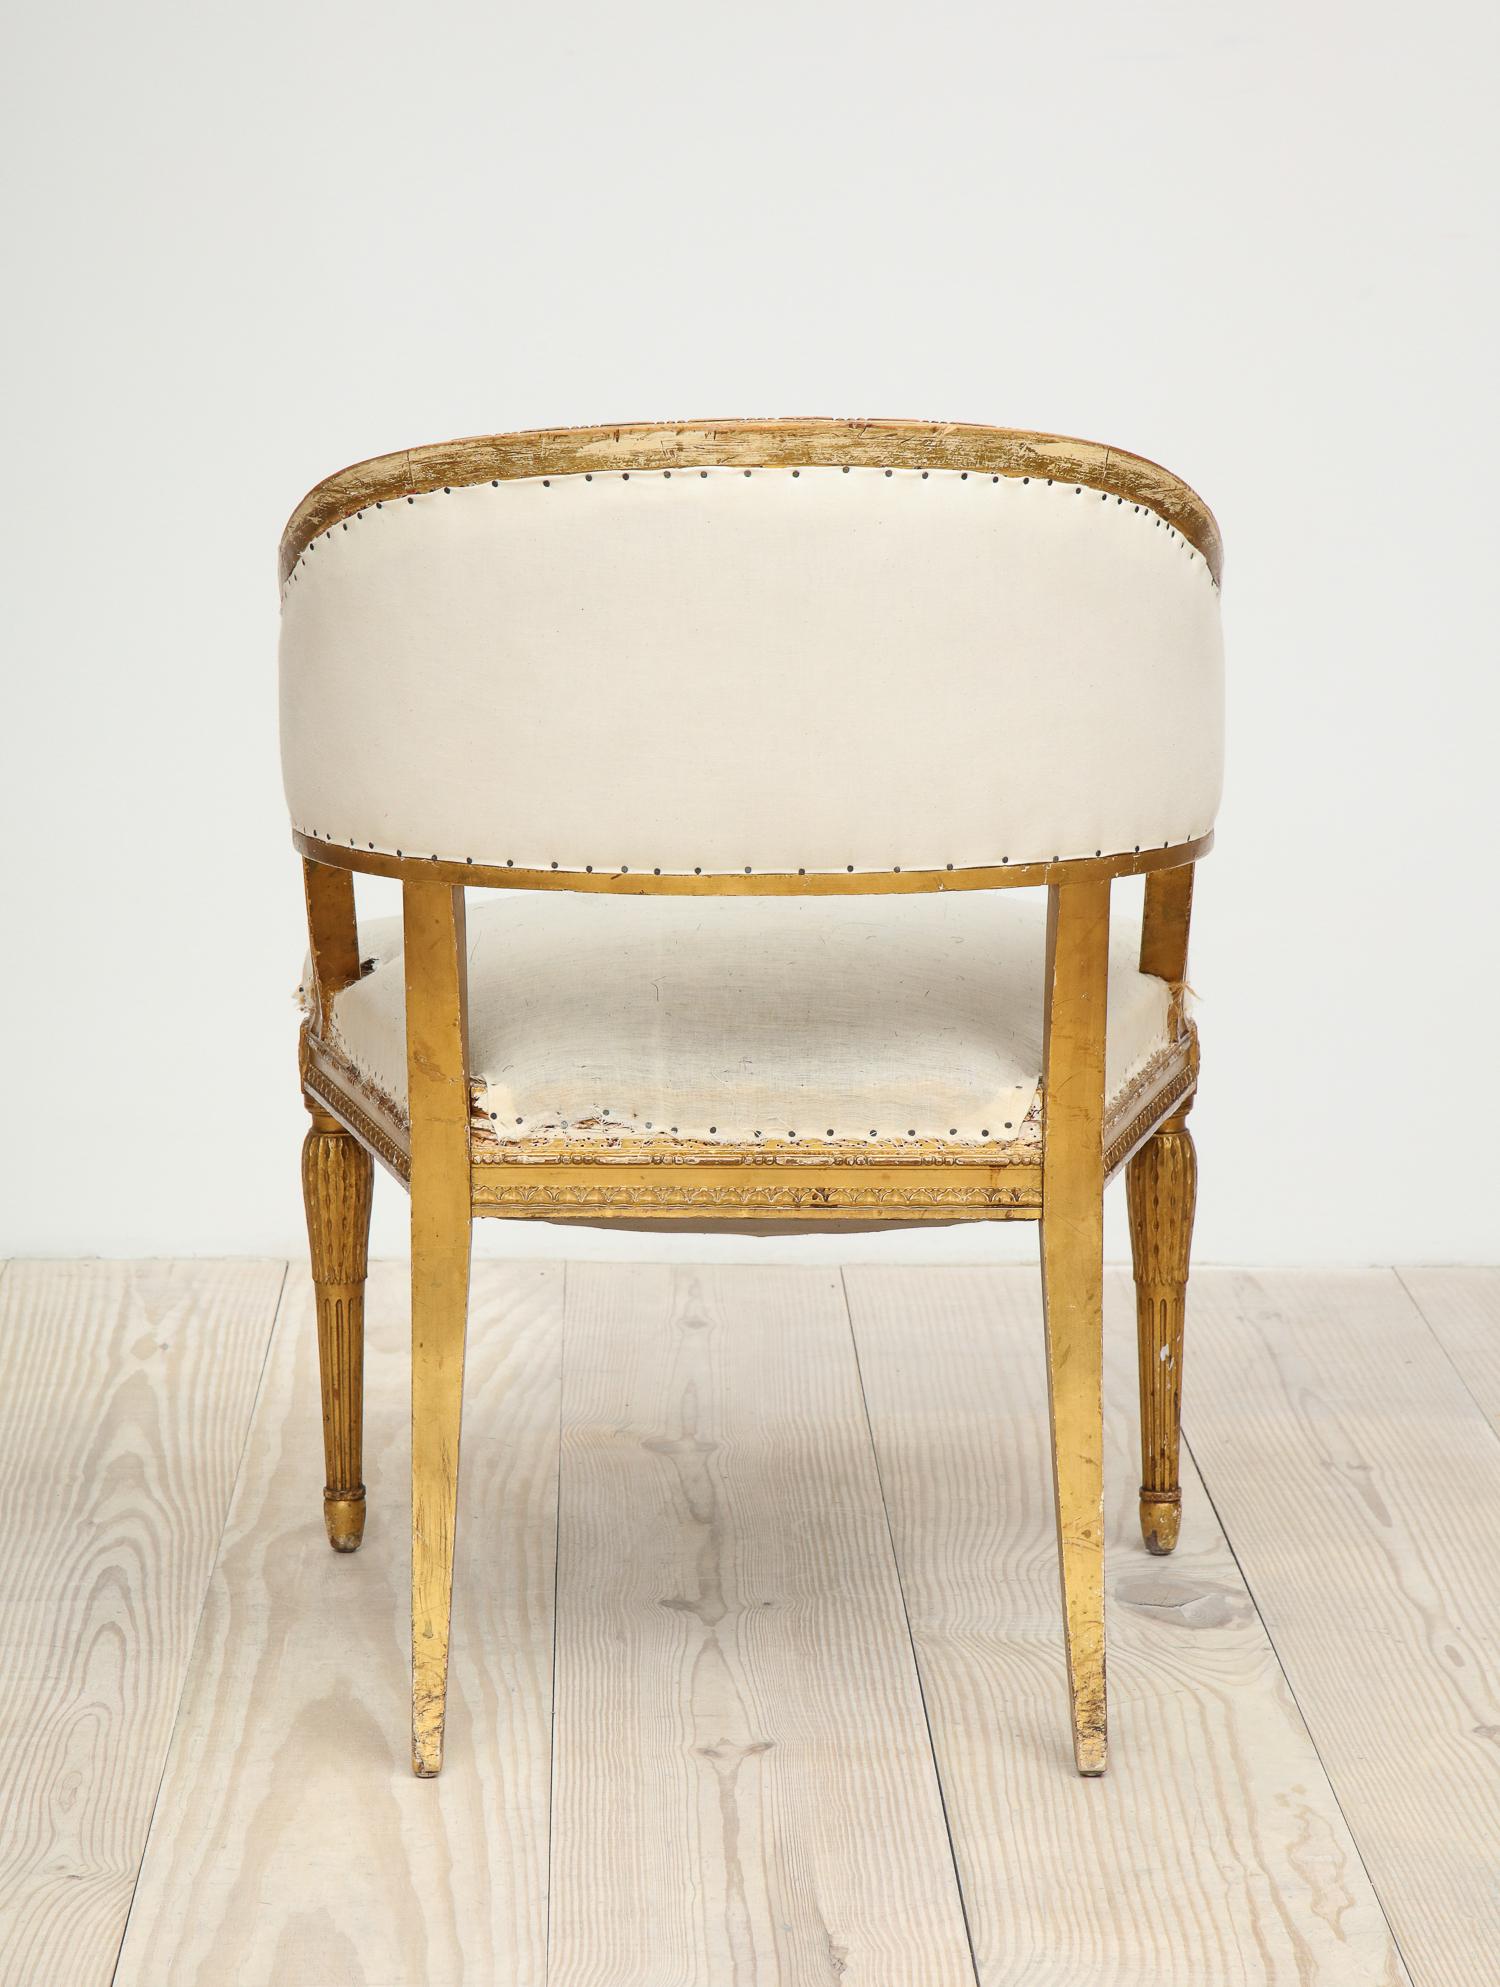 18th Century Giltwood Gustavian Bucket Chairs, Set of 4, Sweden, Circa 1790-1800 For Sale 5